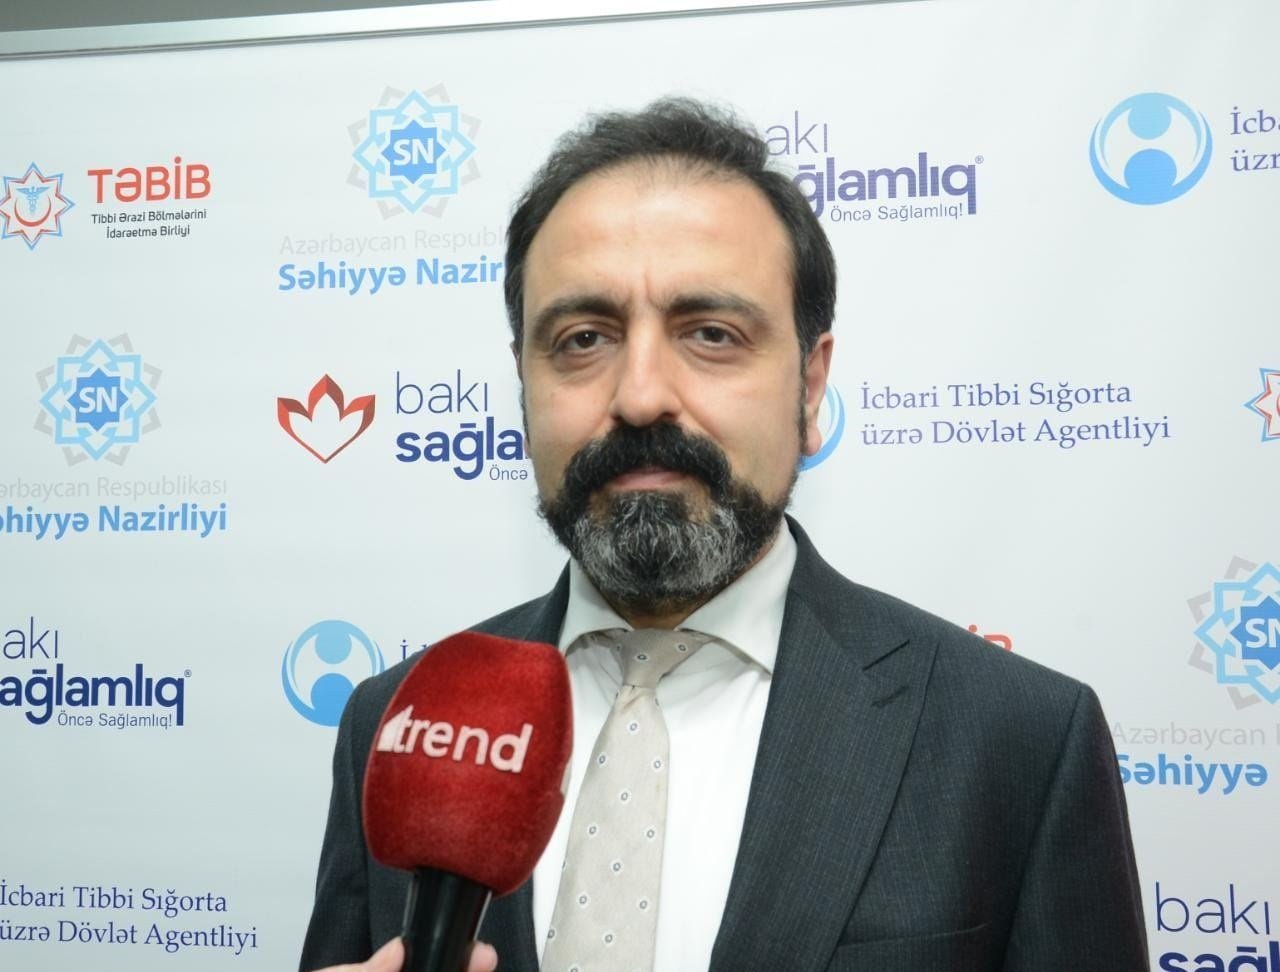 In case of necessity, Turkish TURKOVAC COVID-19 vaccine can be produced in Azerbaijan - TUSEB (Interview)